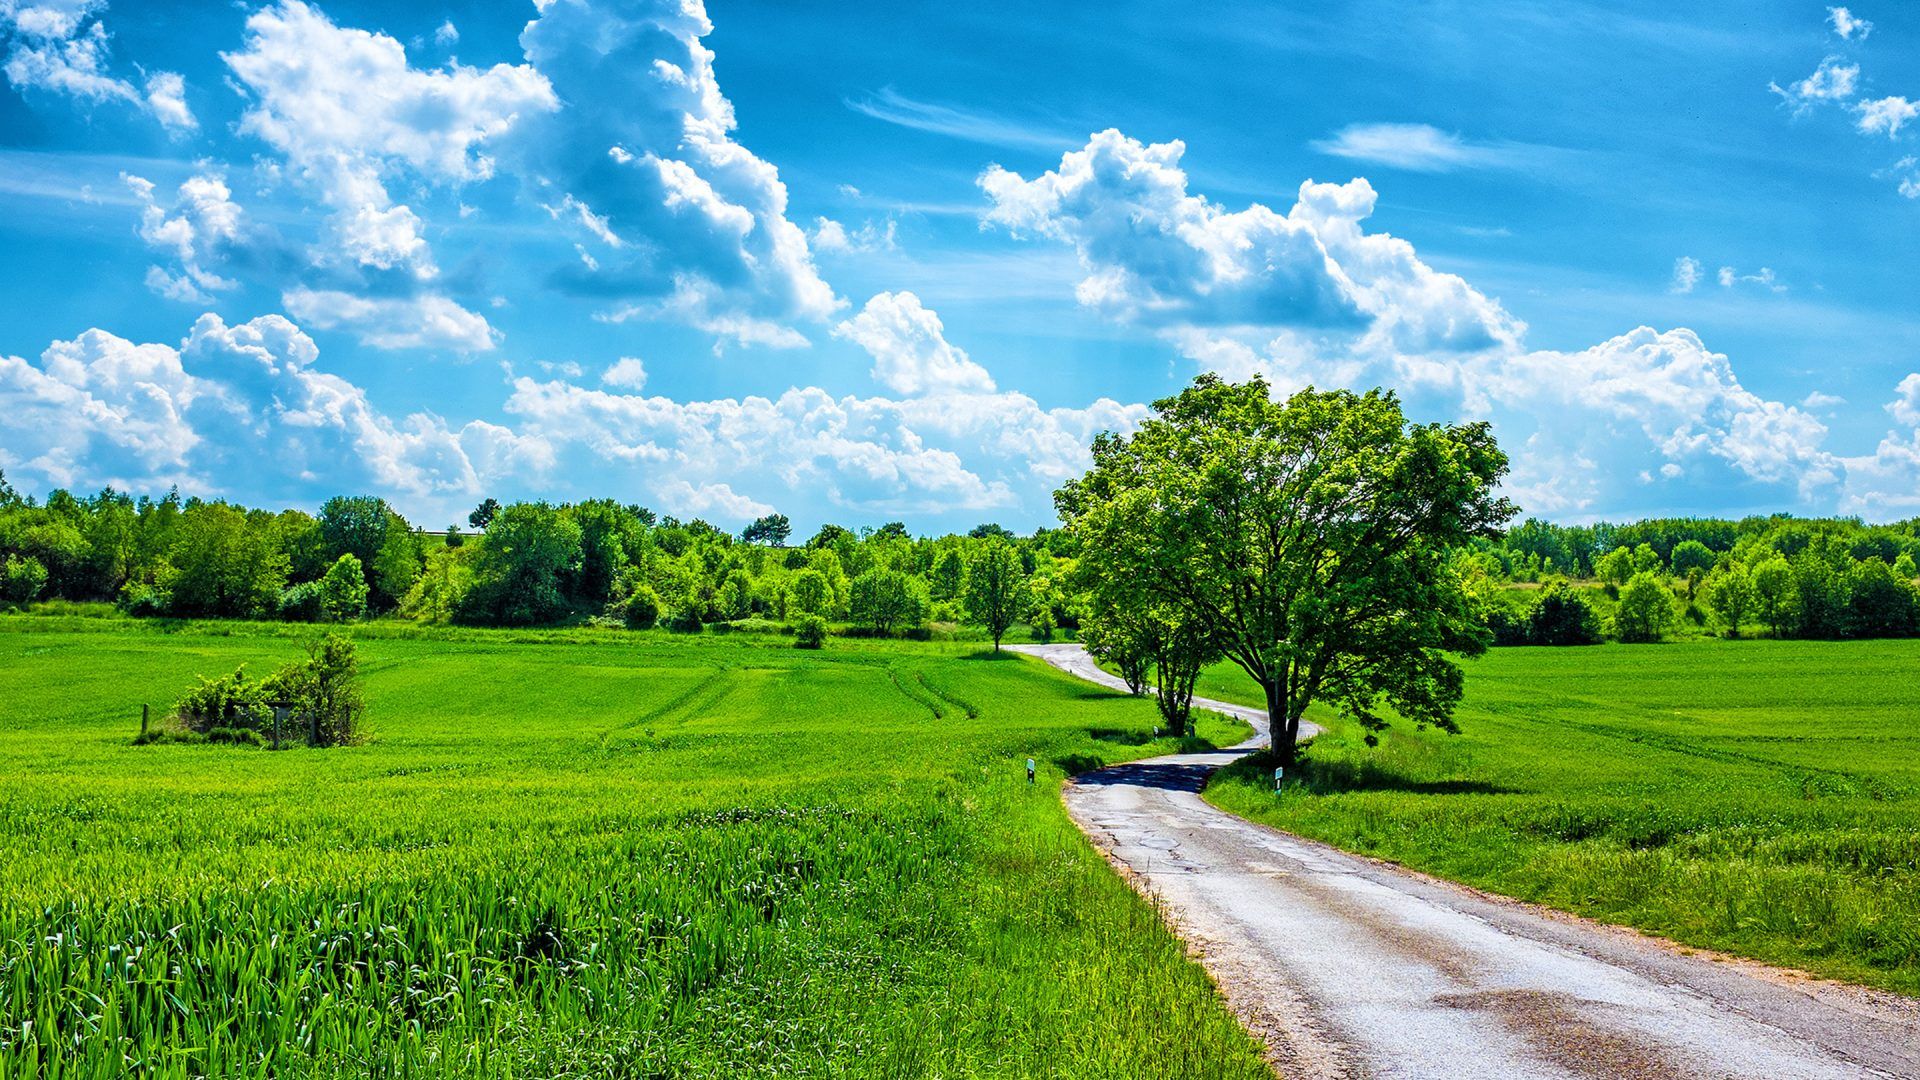 Field Wheat Country Road, Trees, Blue Sky With White Clouds, Spring Green Wallpaper HD, Wallpaper13.com